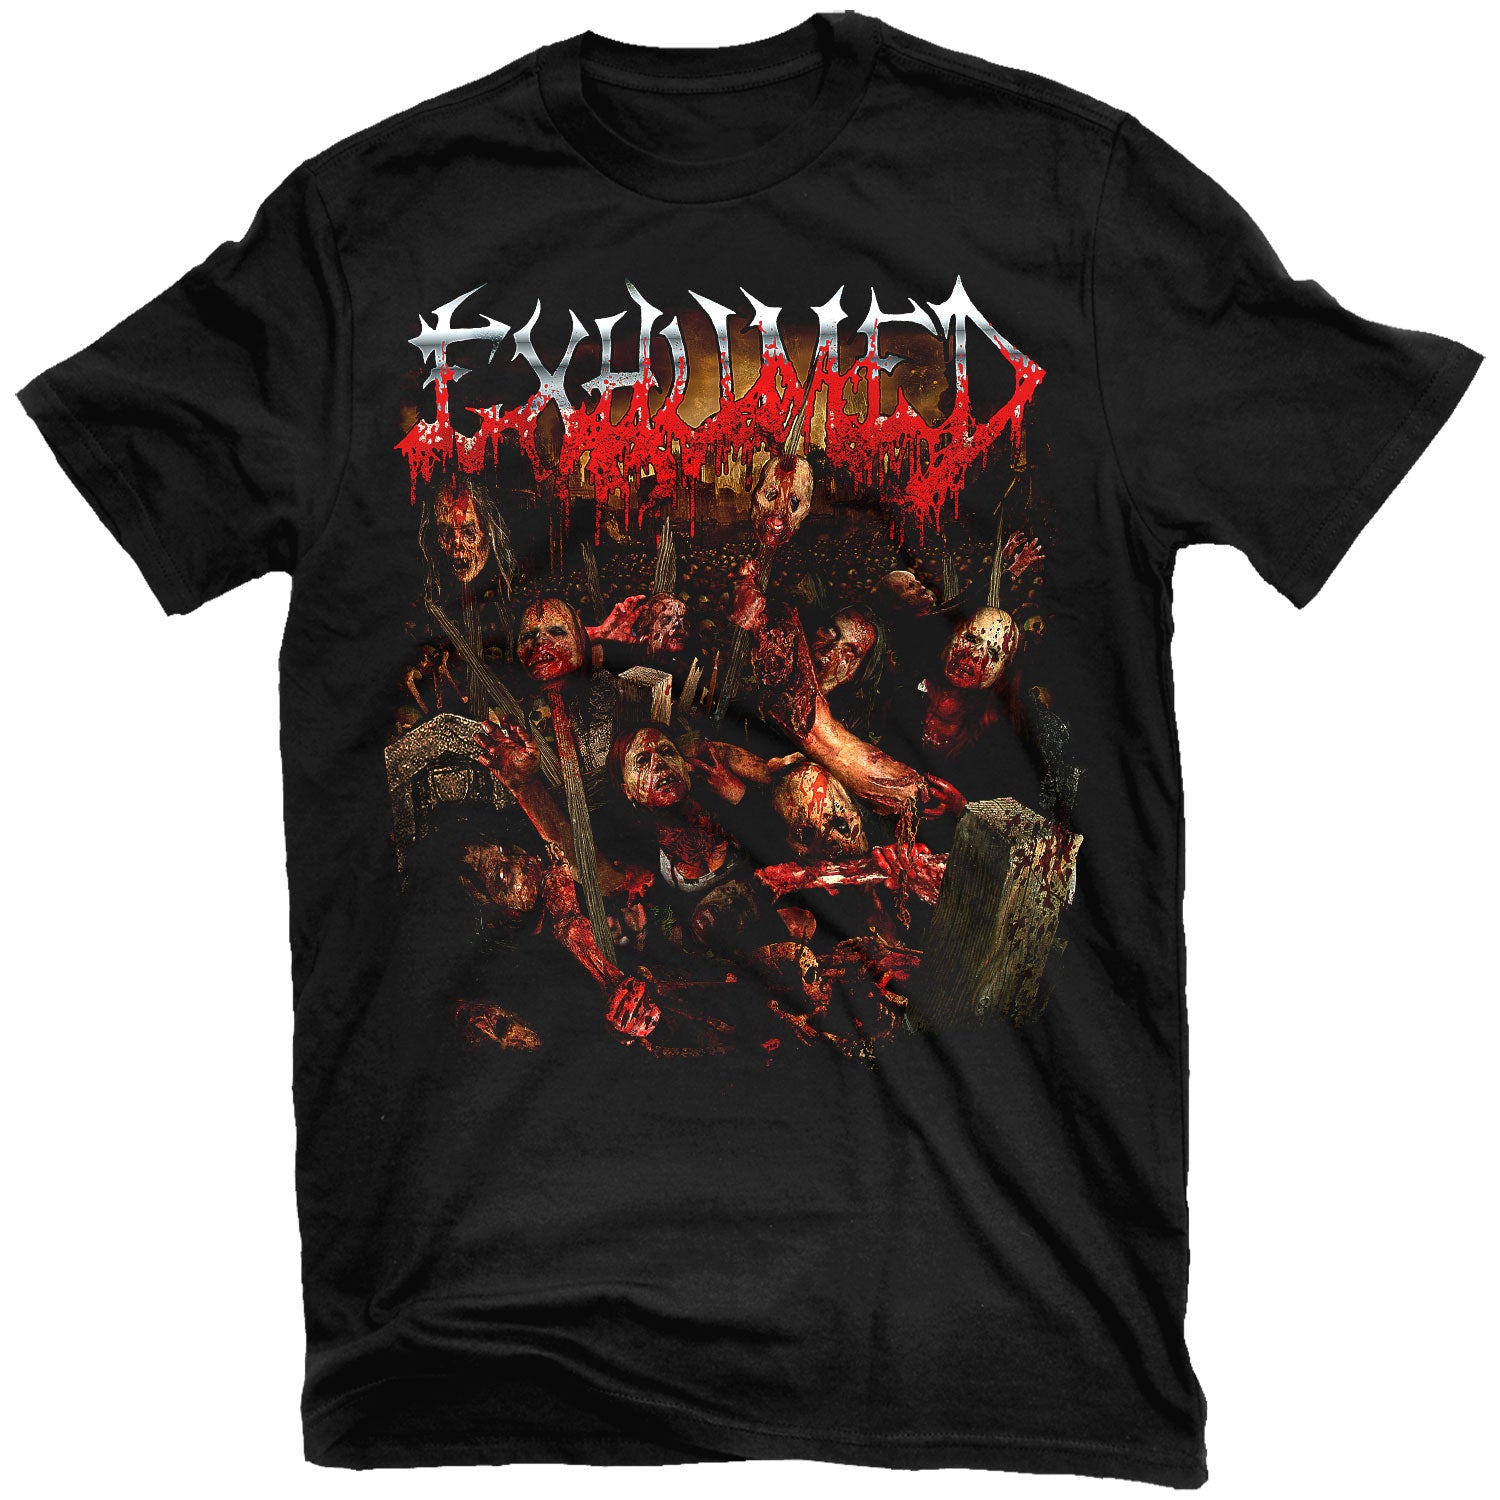 Exhumed "Your Funeral" T-Shirt